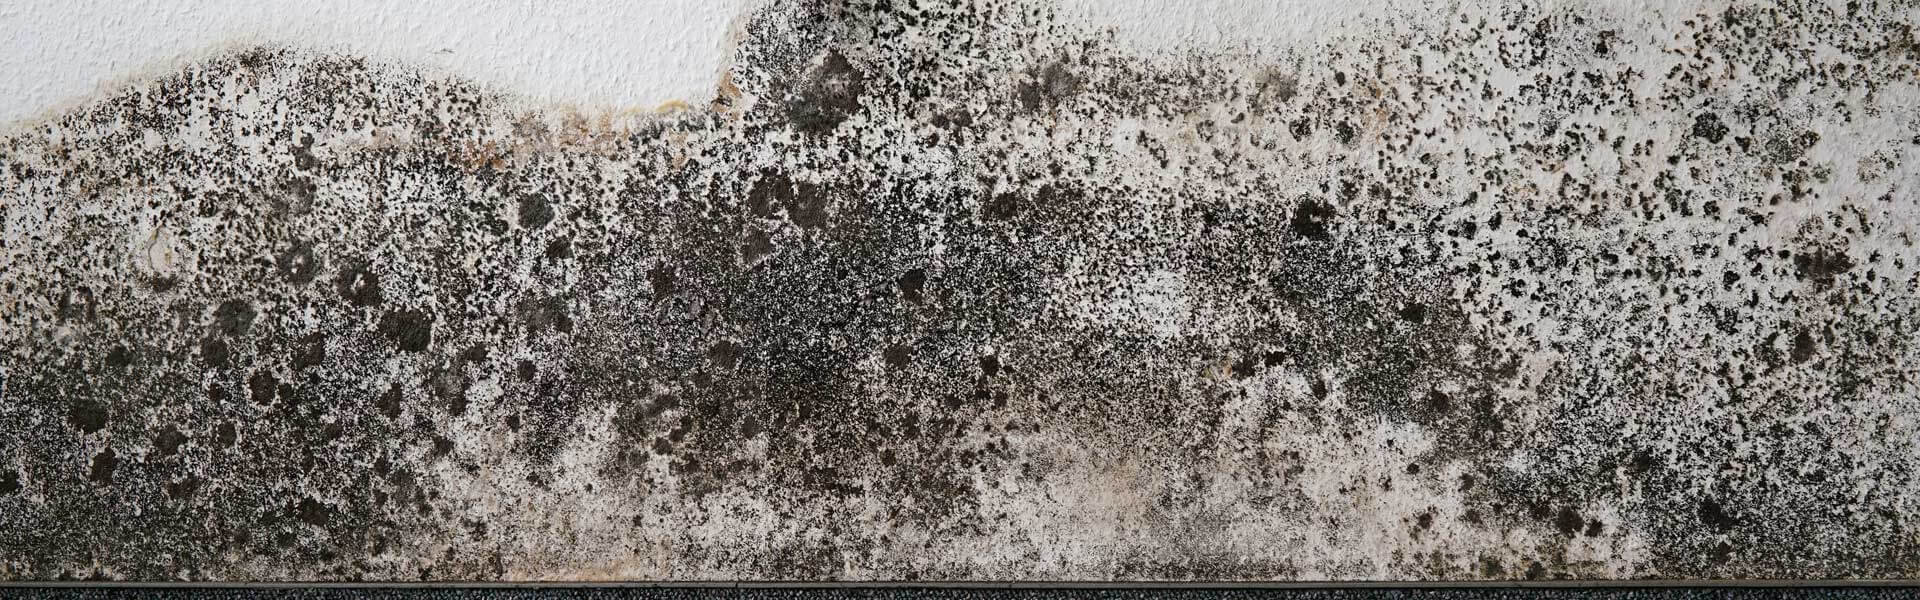 Extensive mold damage on the wall of a house